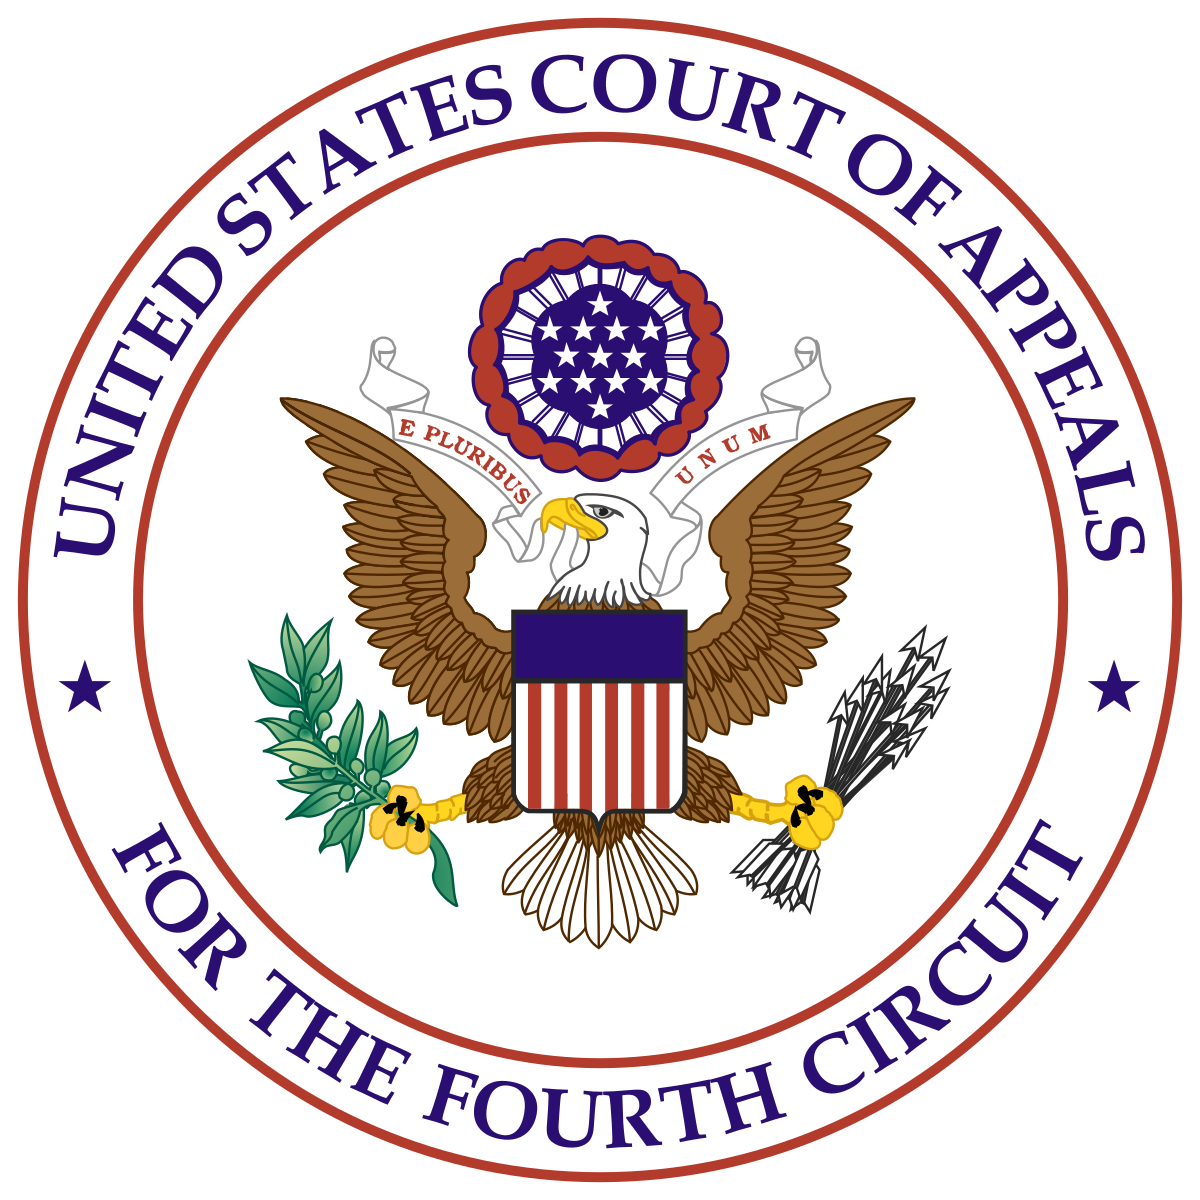 Official seal for the United States Court of Appeals for the Fourth Circuit Court